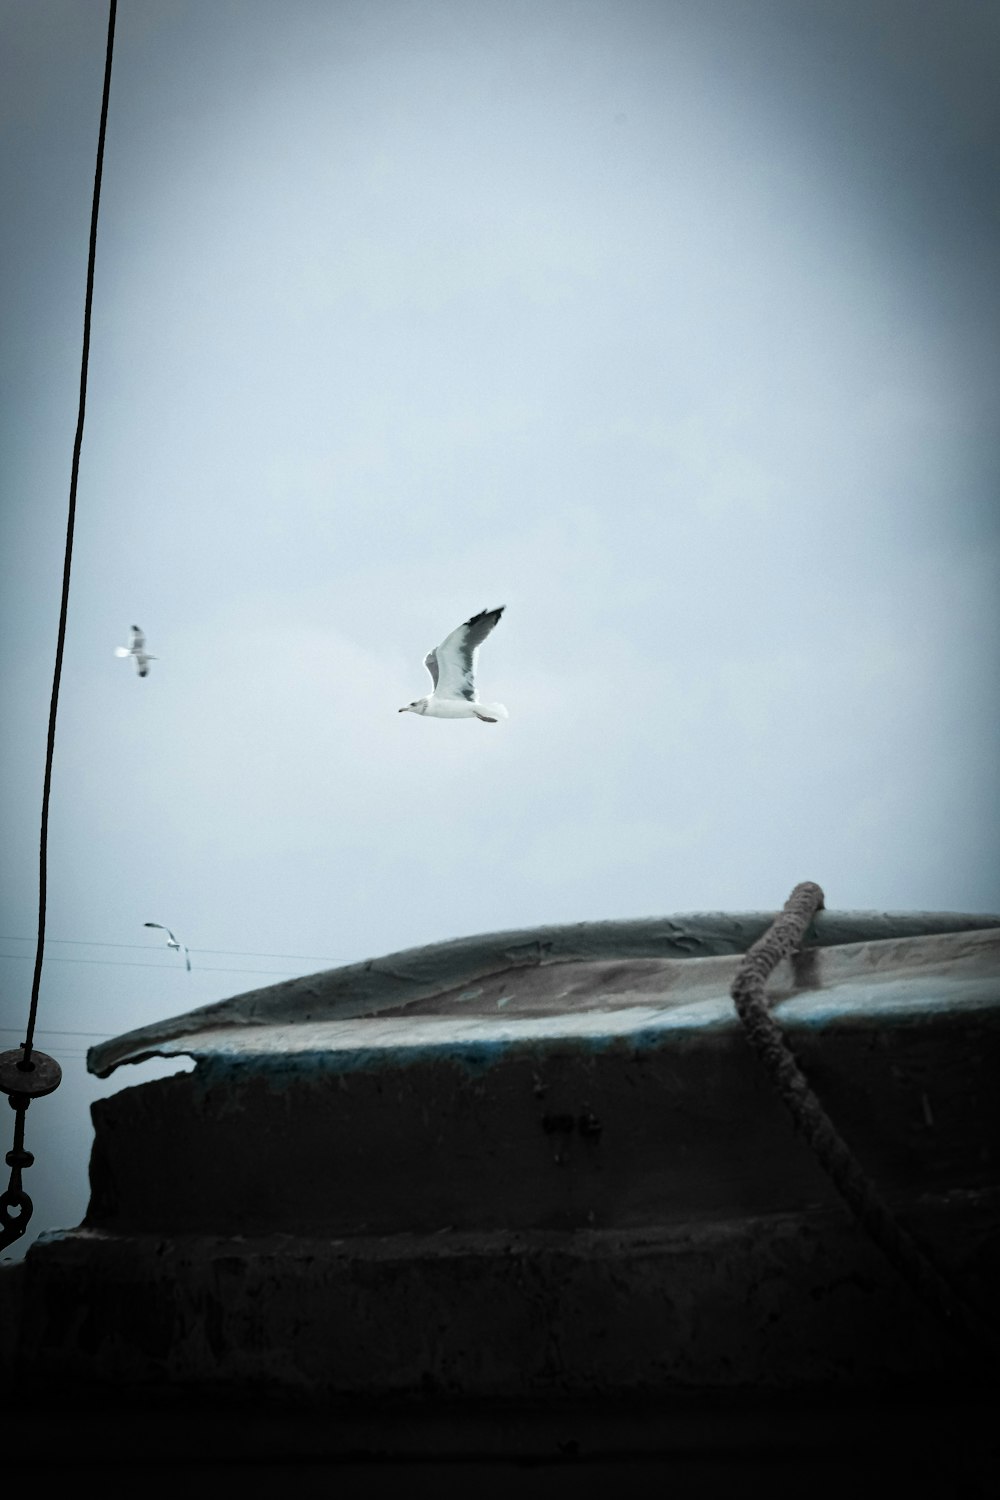 a seagull flying over a boat in the ocean